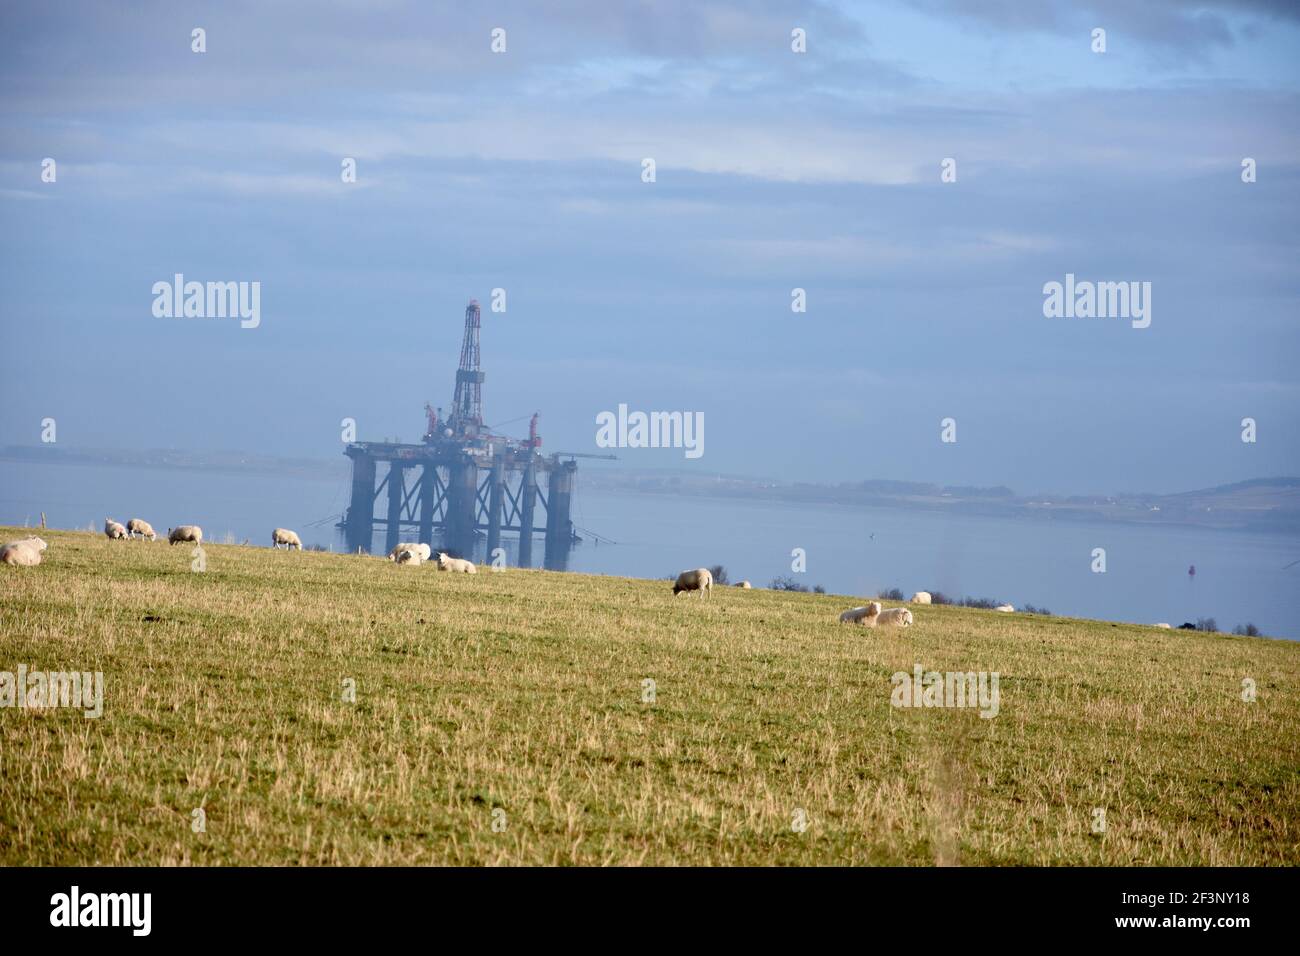 Oil rig, Cromarty Firth, Highland Stock Photo